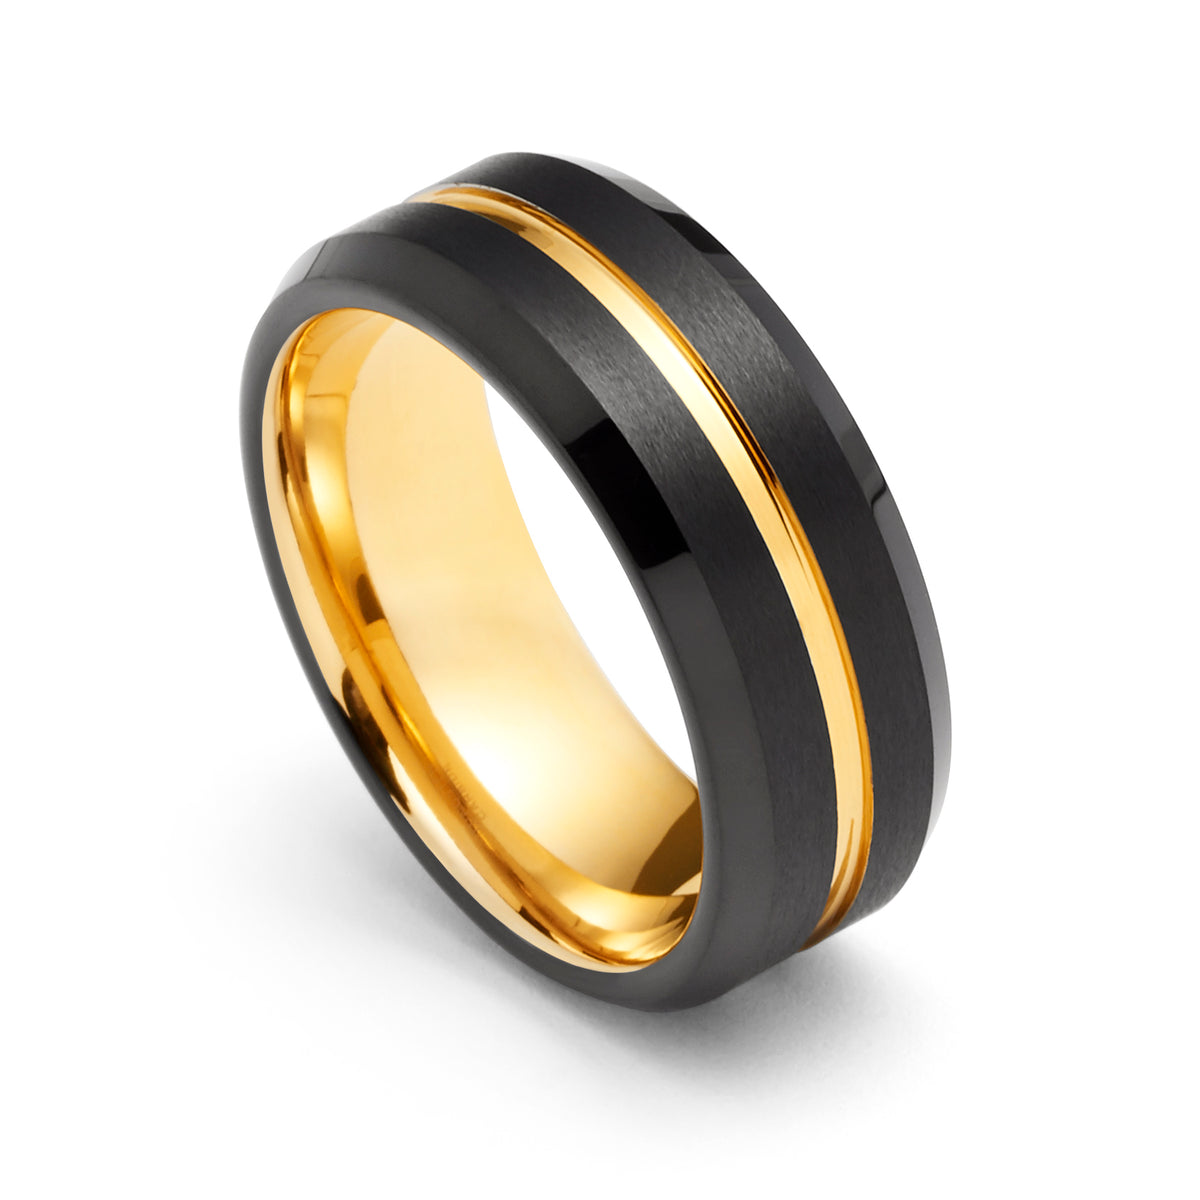 RingMen Jewelry | Tungsten wedding bands, rings for men and women